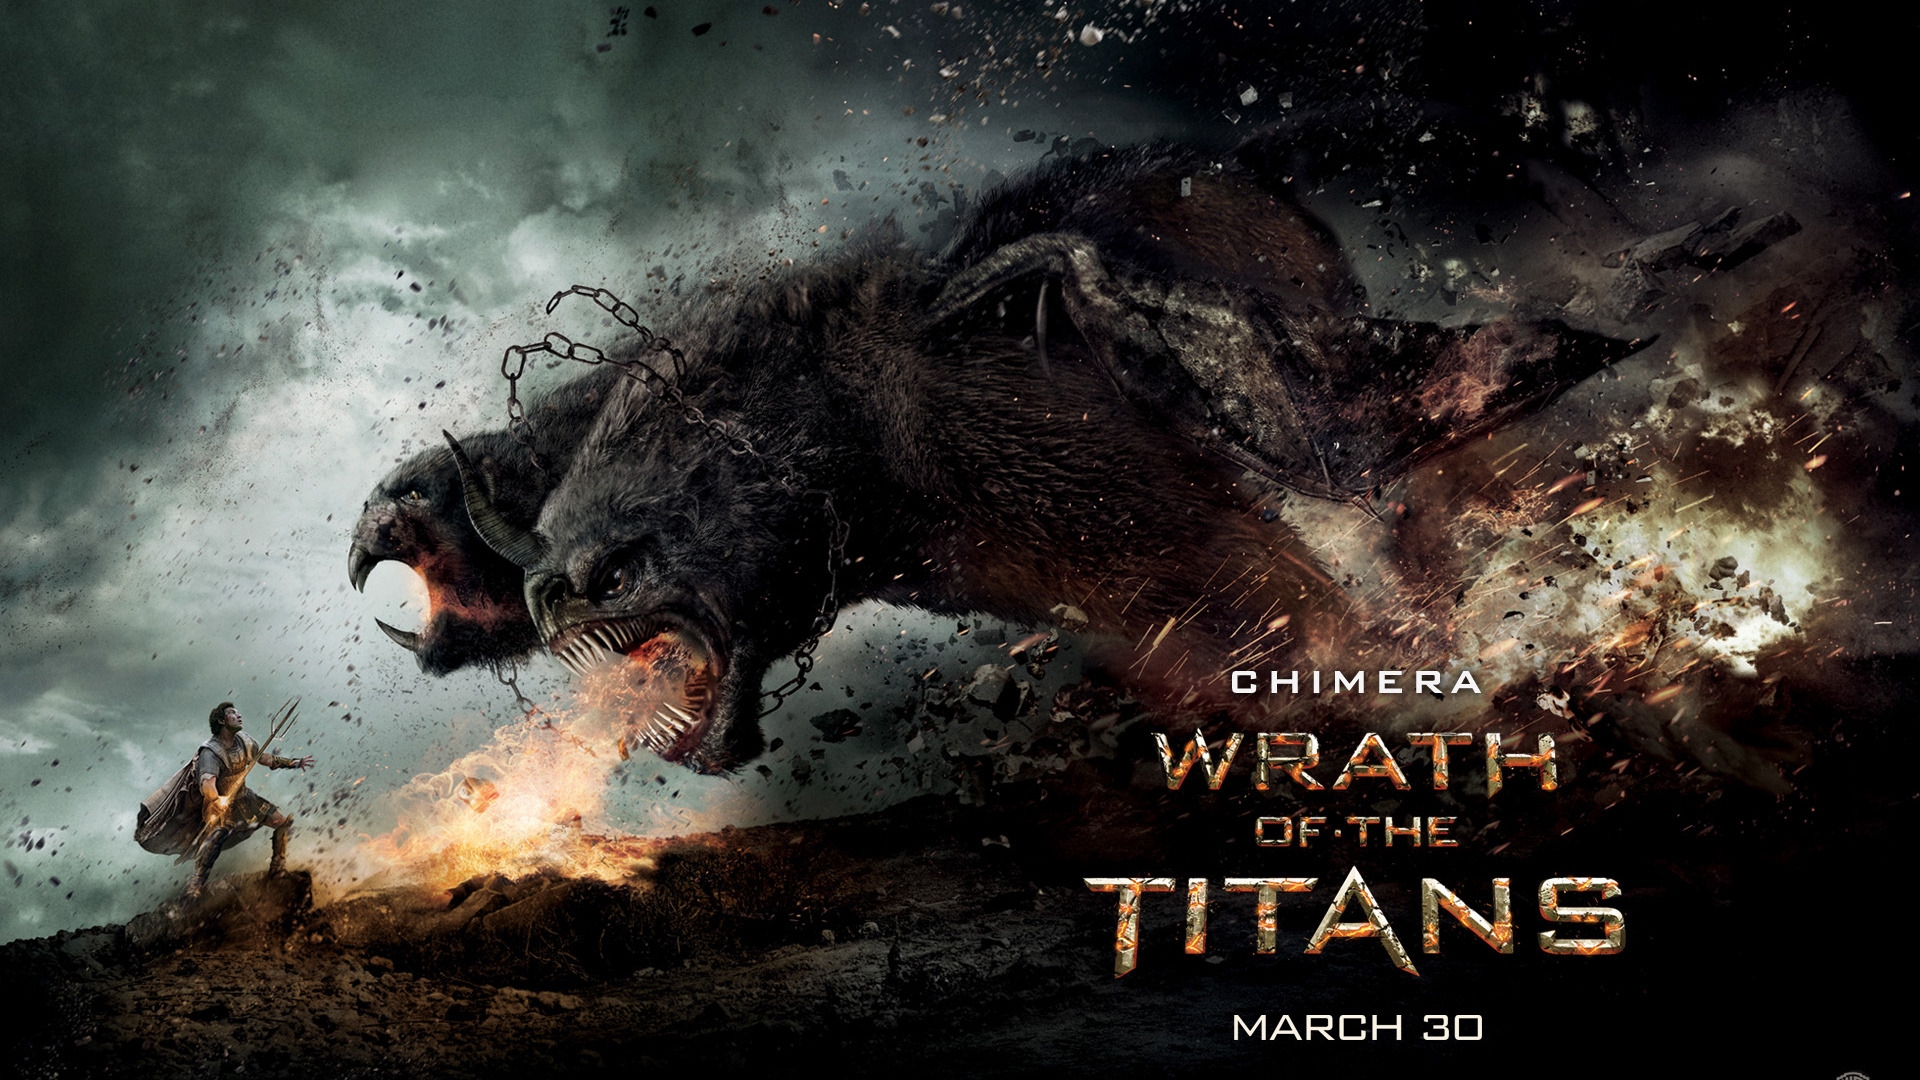 Chimera Wrath of the Titans for 1920 x 1080 HDTV 1080p resolution